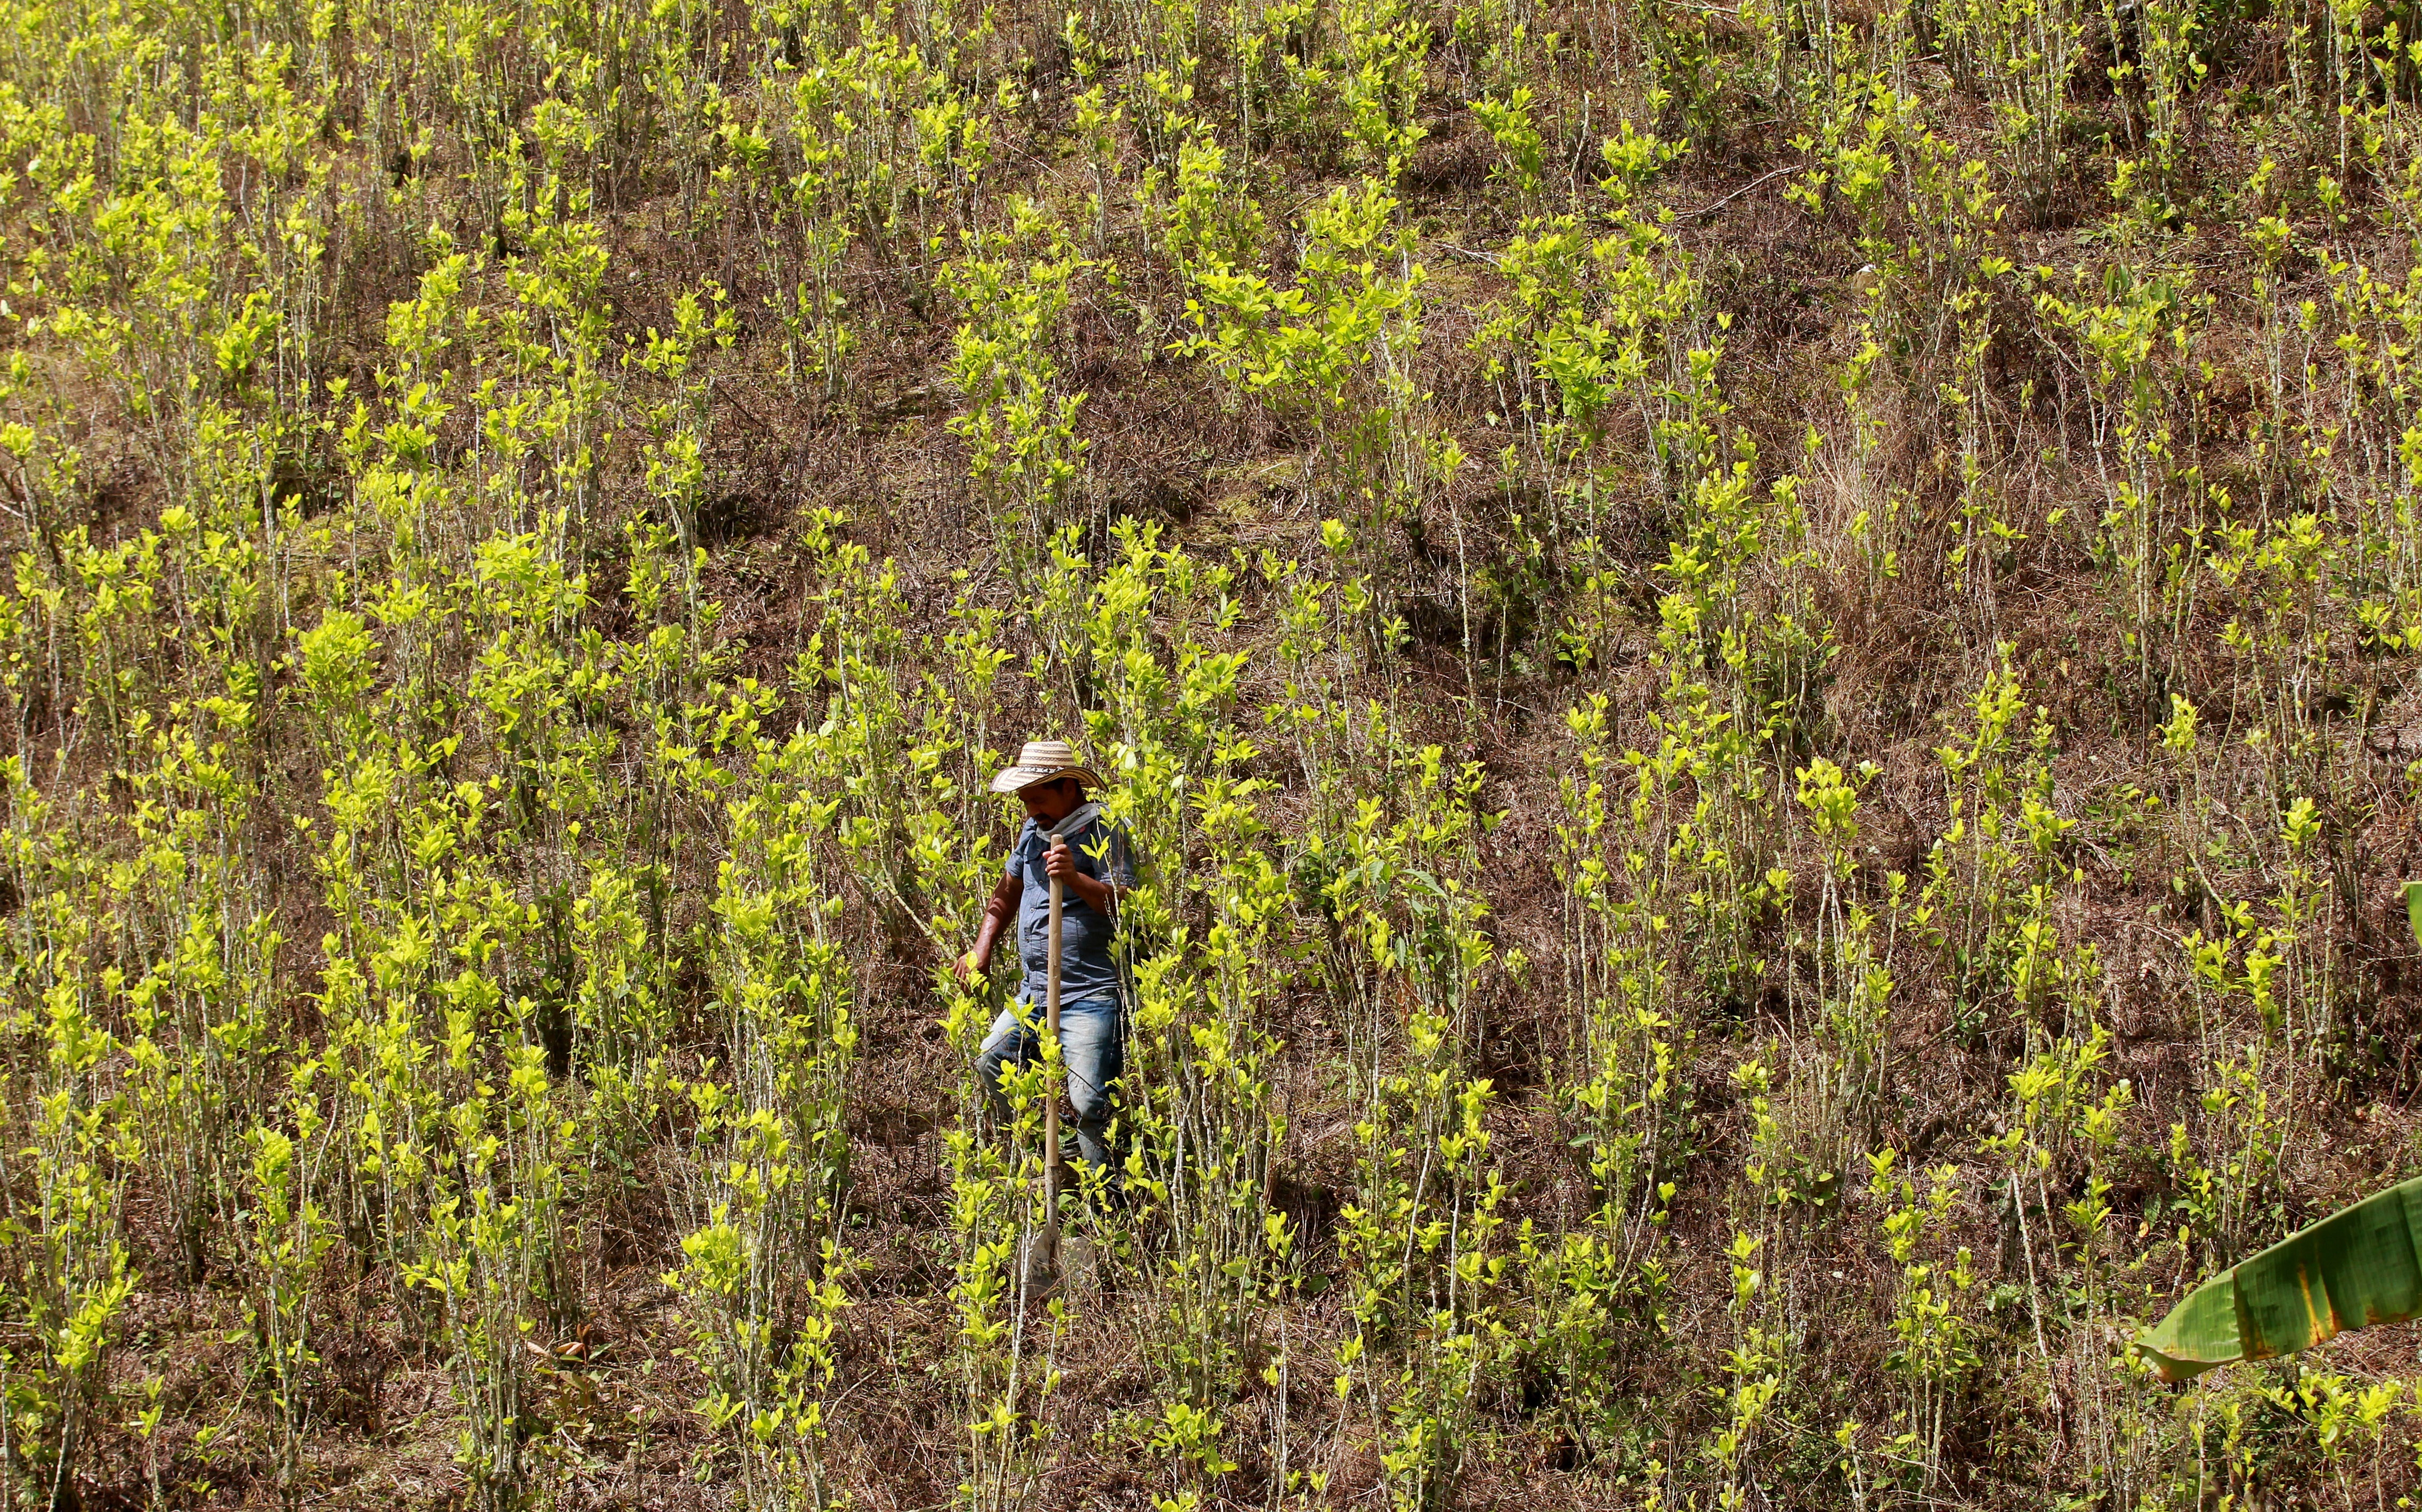 Photograph of a farmer walking through a coca field, while an act of voluntary substitution of illicit crops is carried out in the village of Pueblo Nuevo in the municipality of Briceño (Colombia).  EFE/LEONARDO MUÑOZ/File